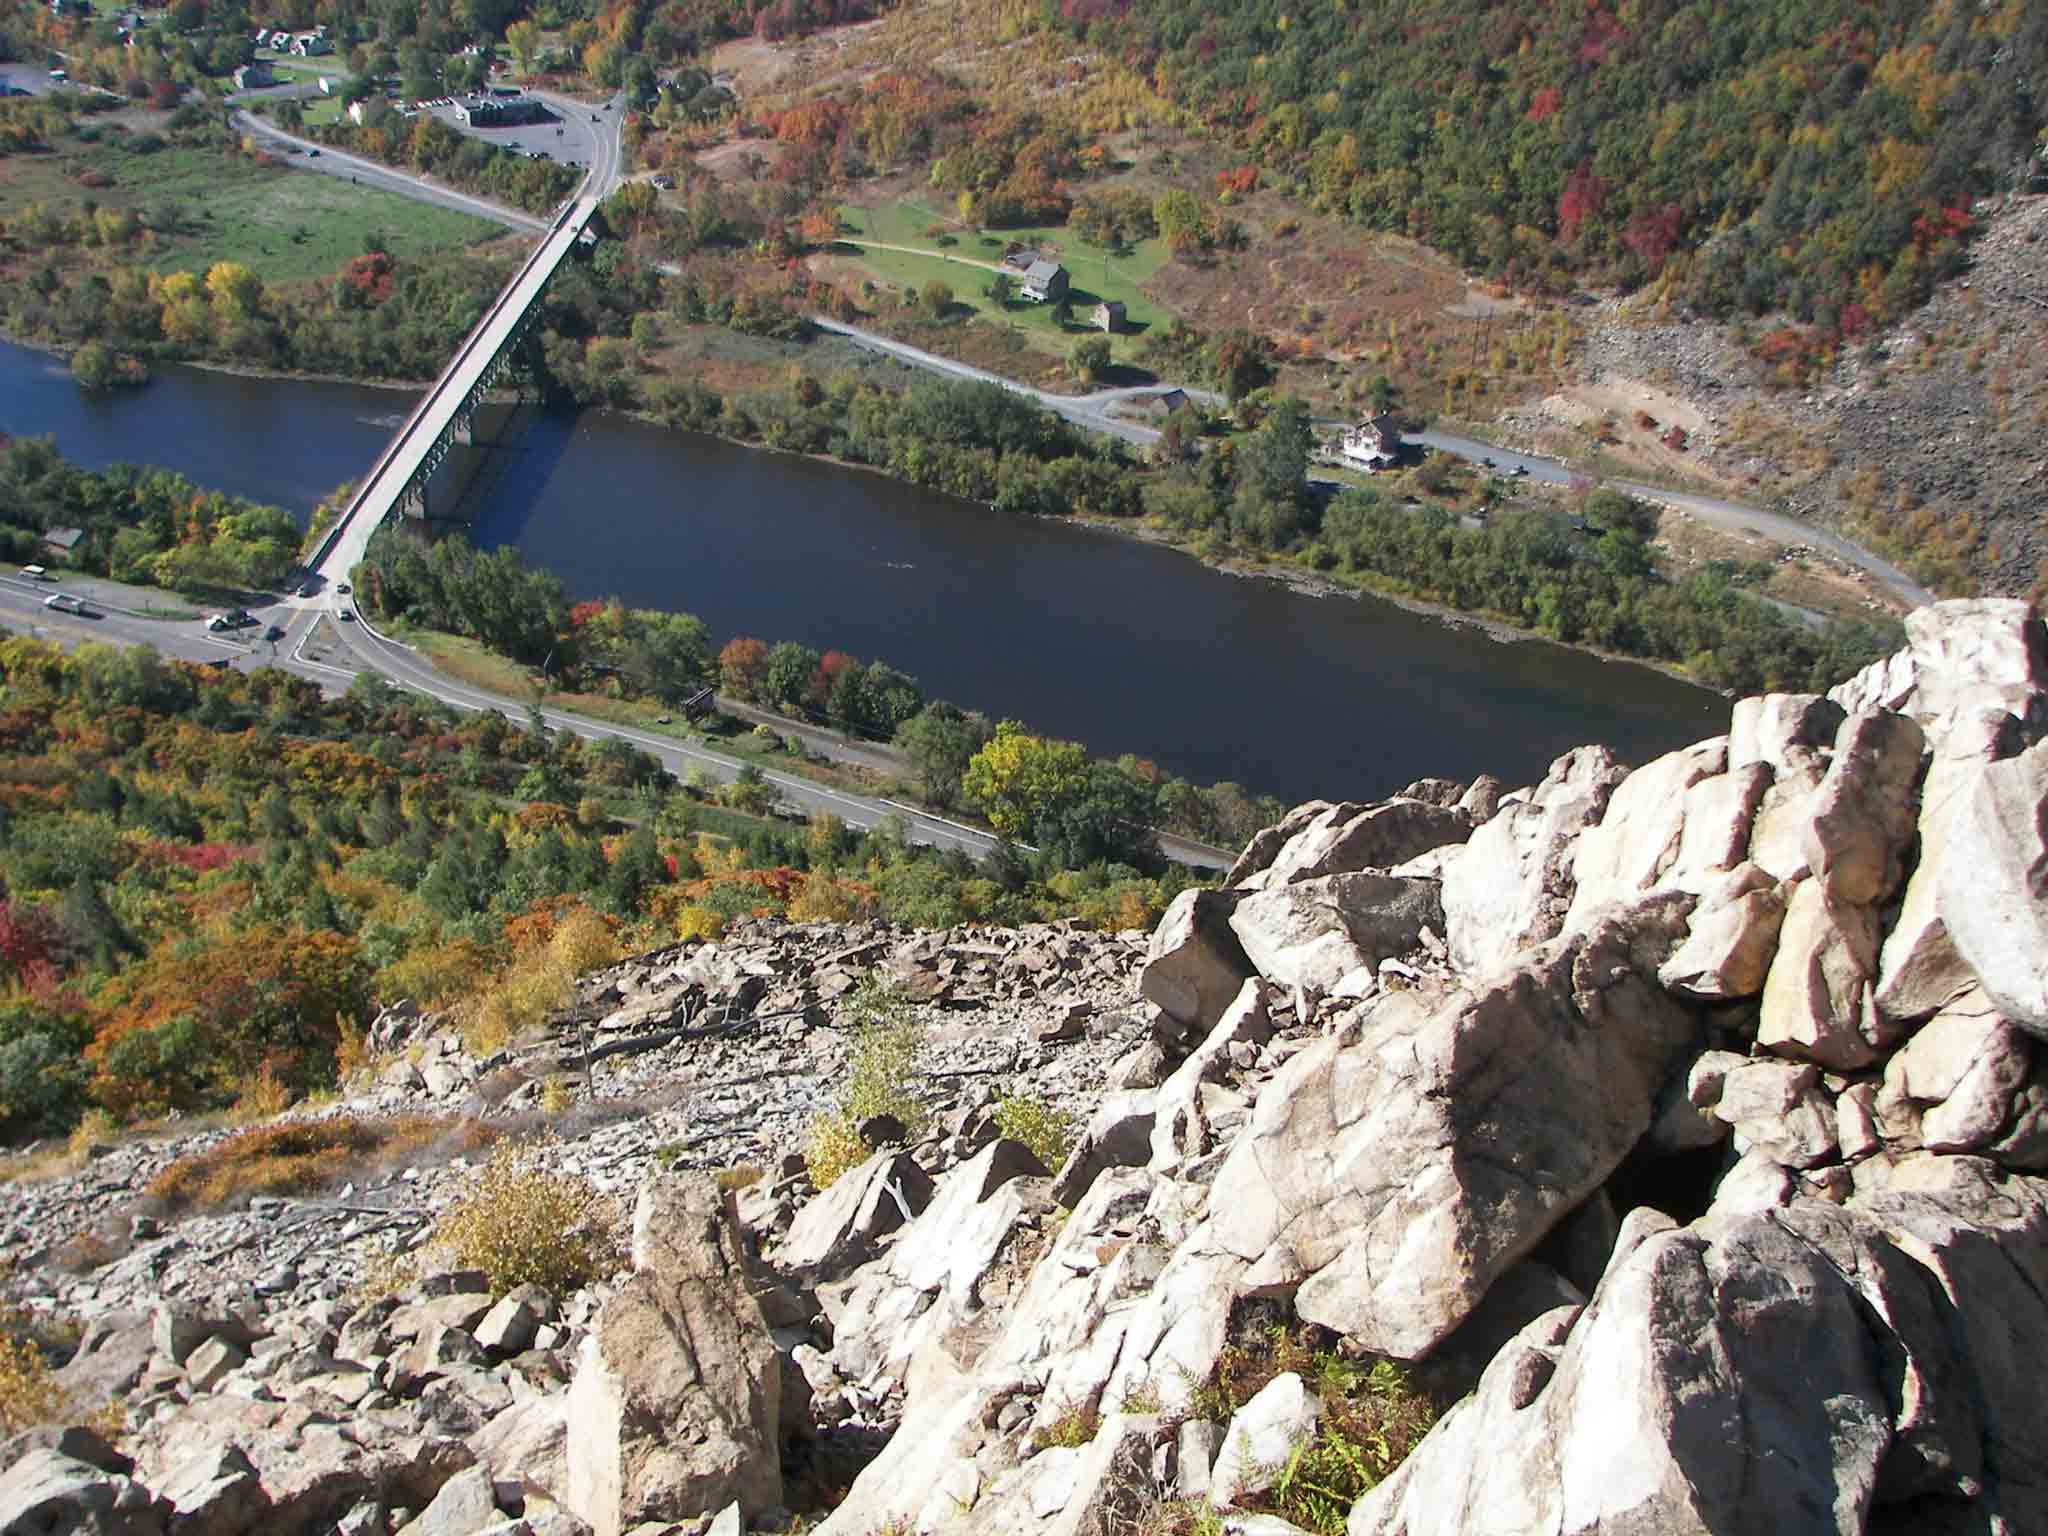 mm 19.5 View from the rocks above with the Lehigh River and  PA 873 
bridge far below  Courtesy jadams444@aol.com